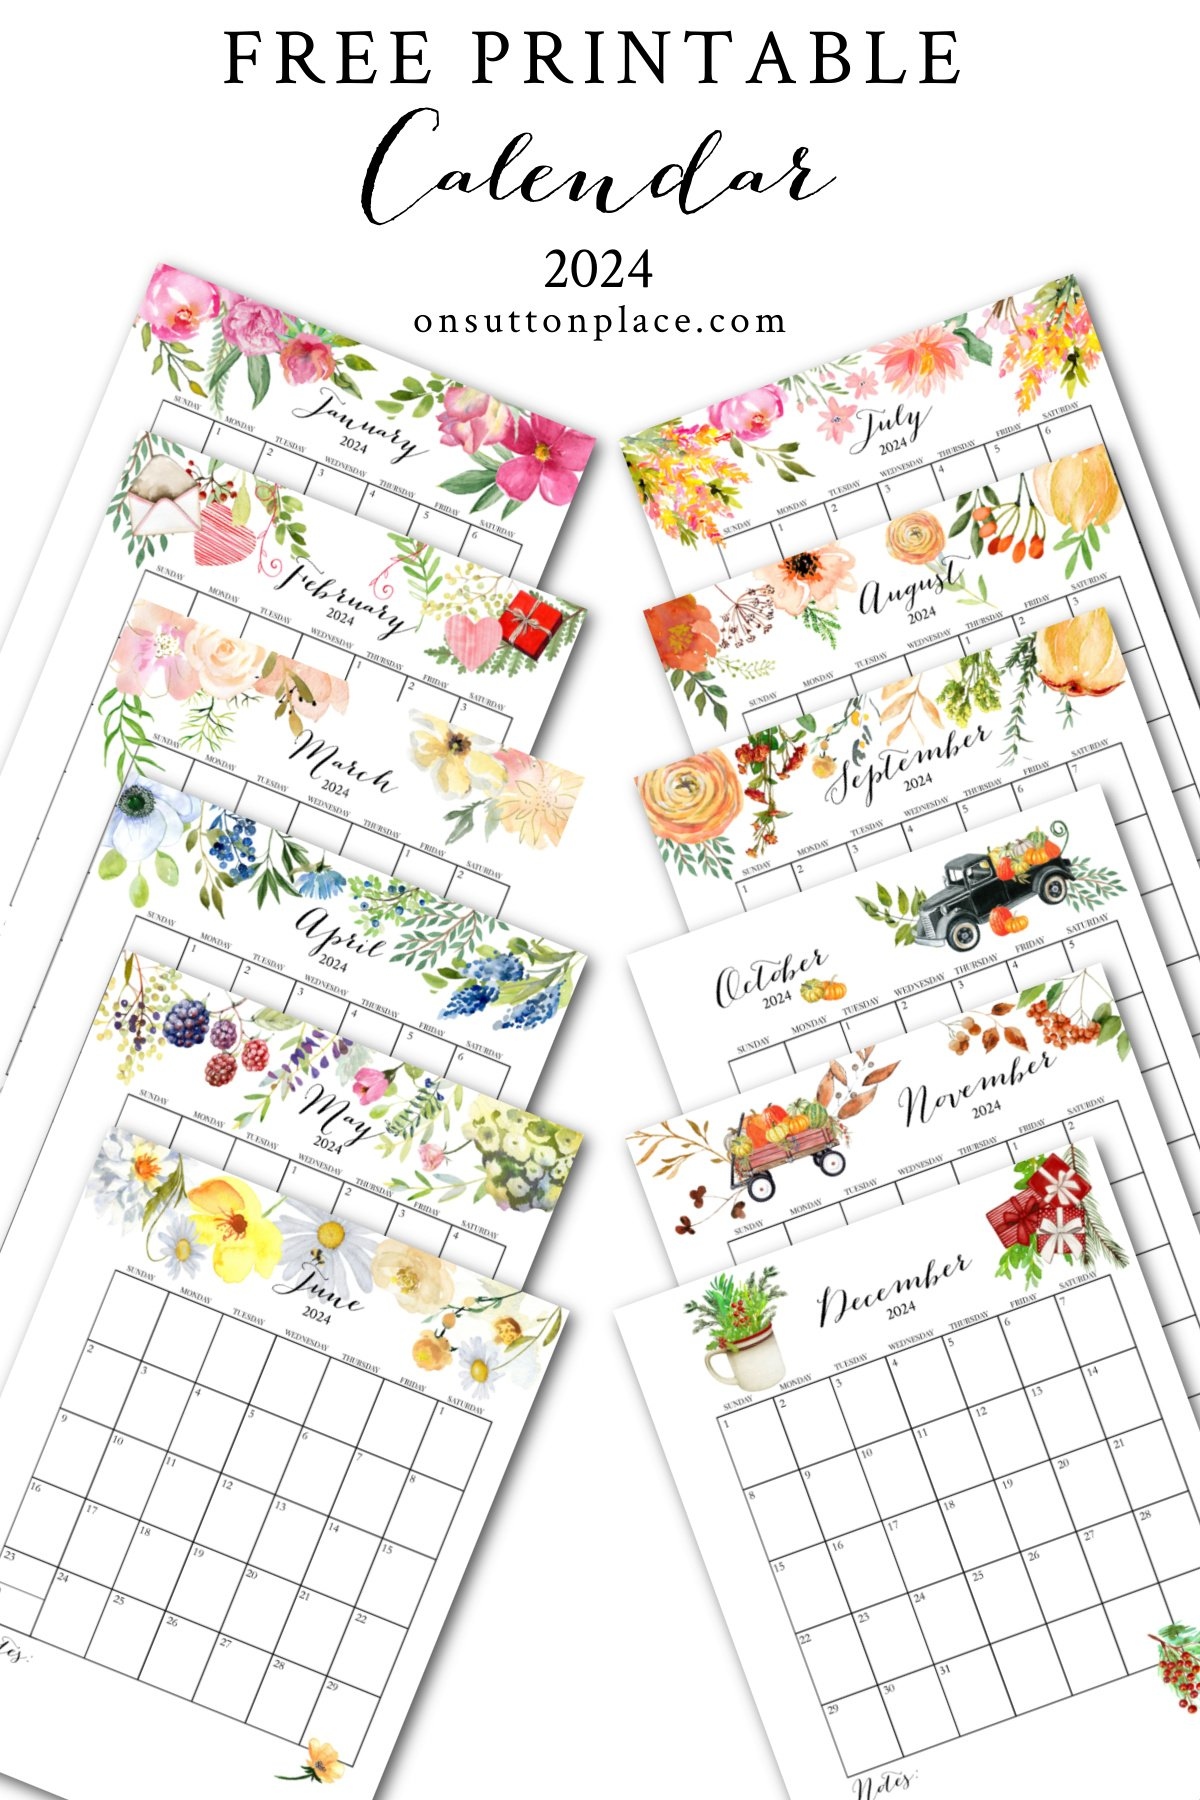 2024 Free Printable Calendar With Planner Pages - On Sutton Place inside Free Printable Calendar 2024 Pocket Size